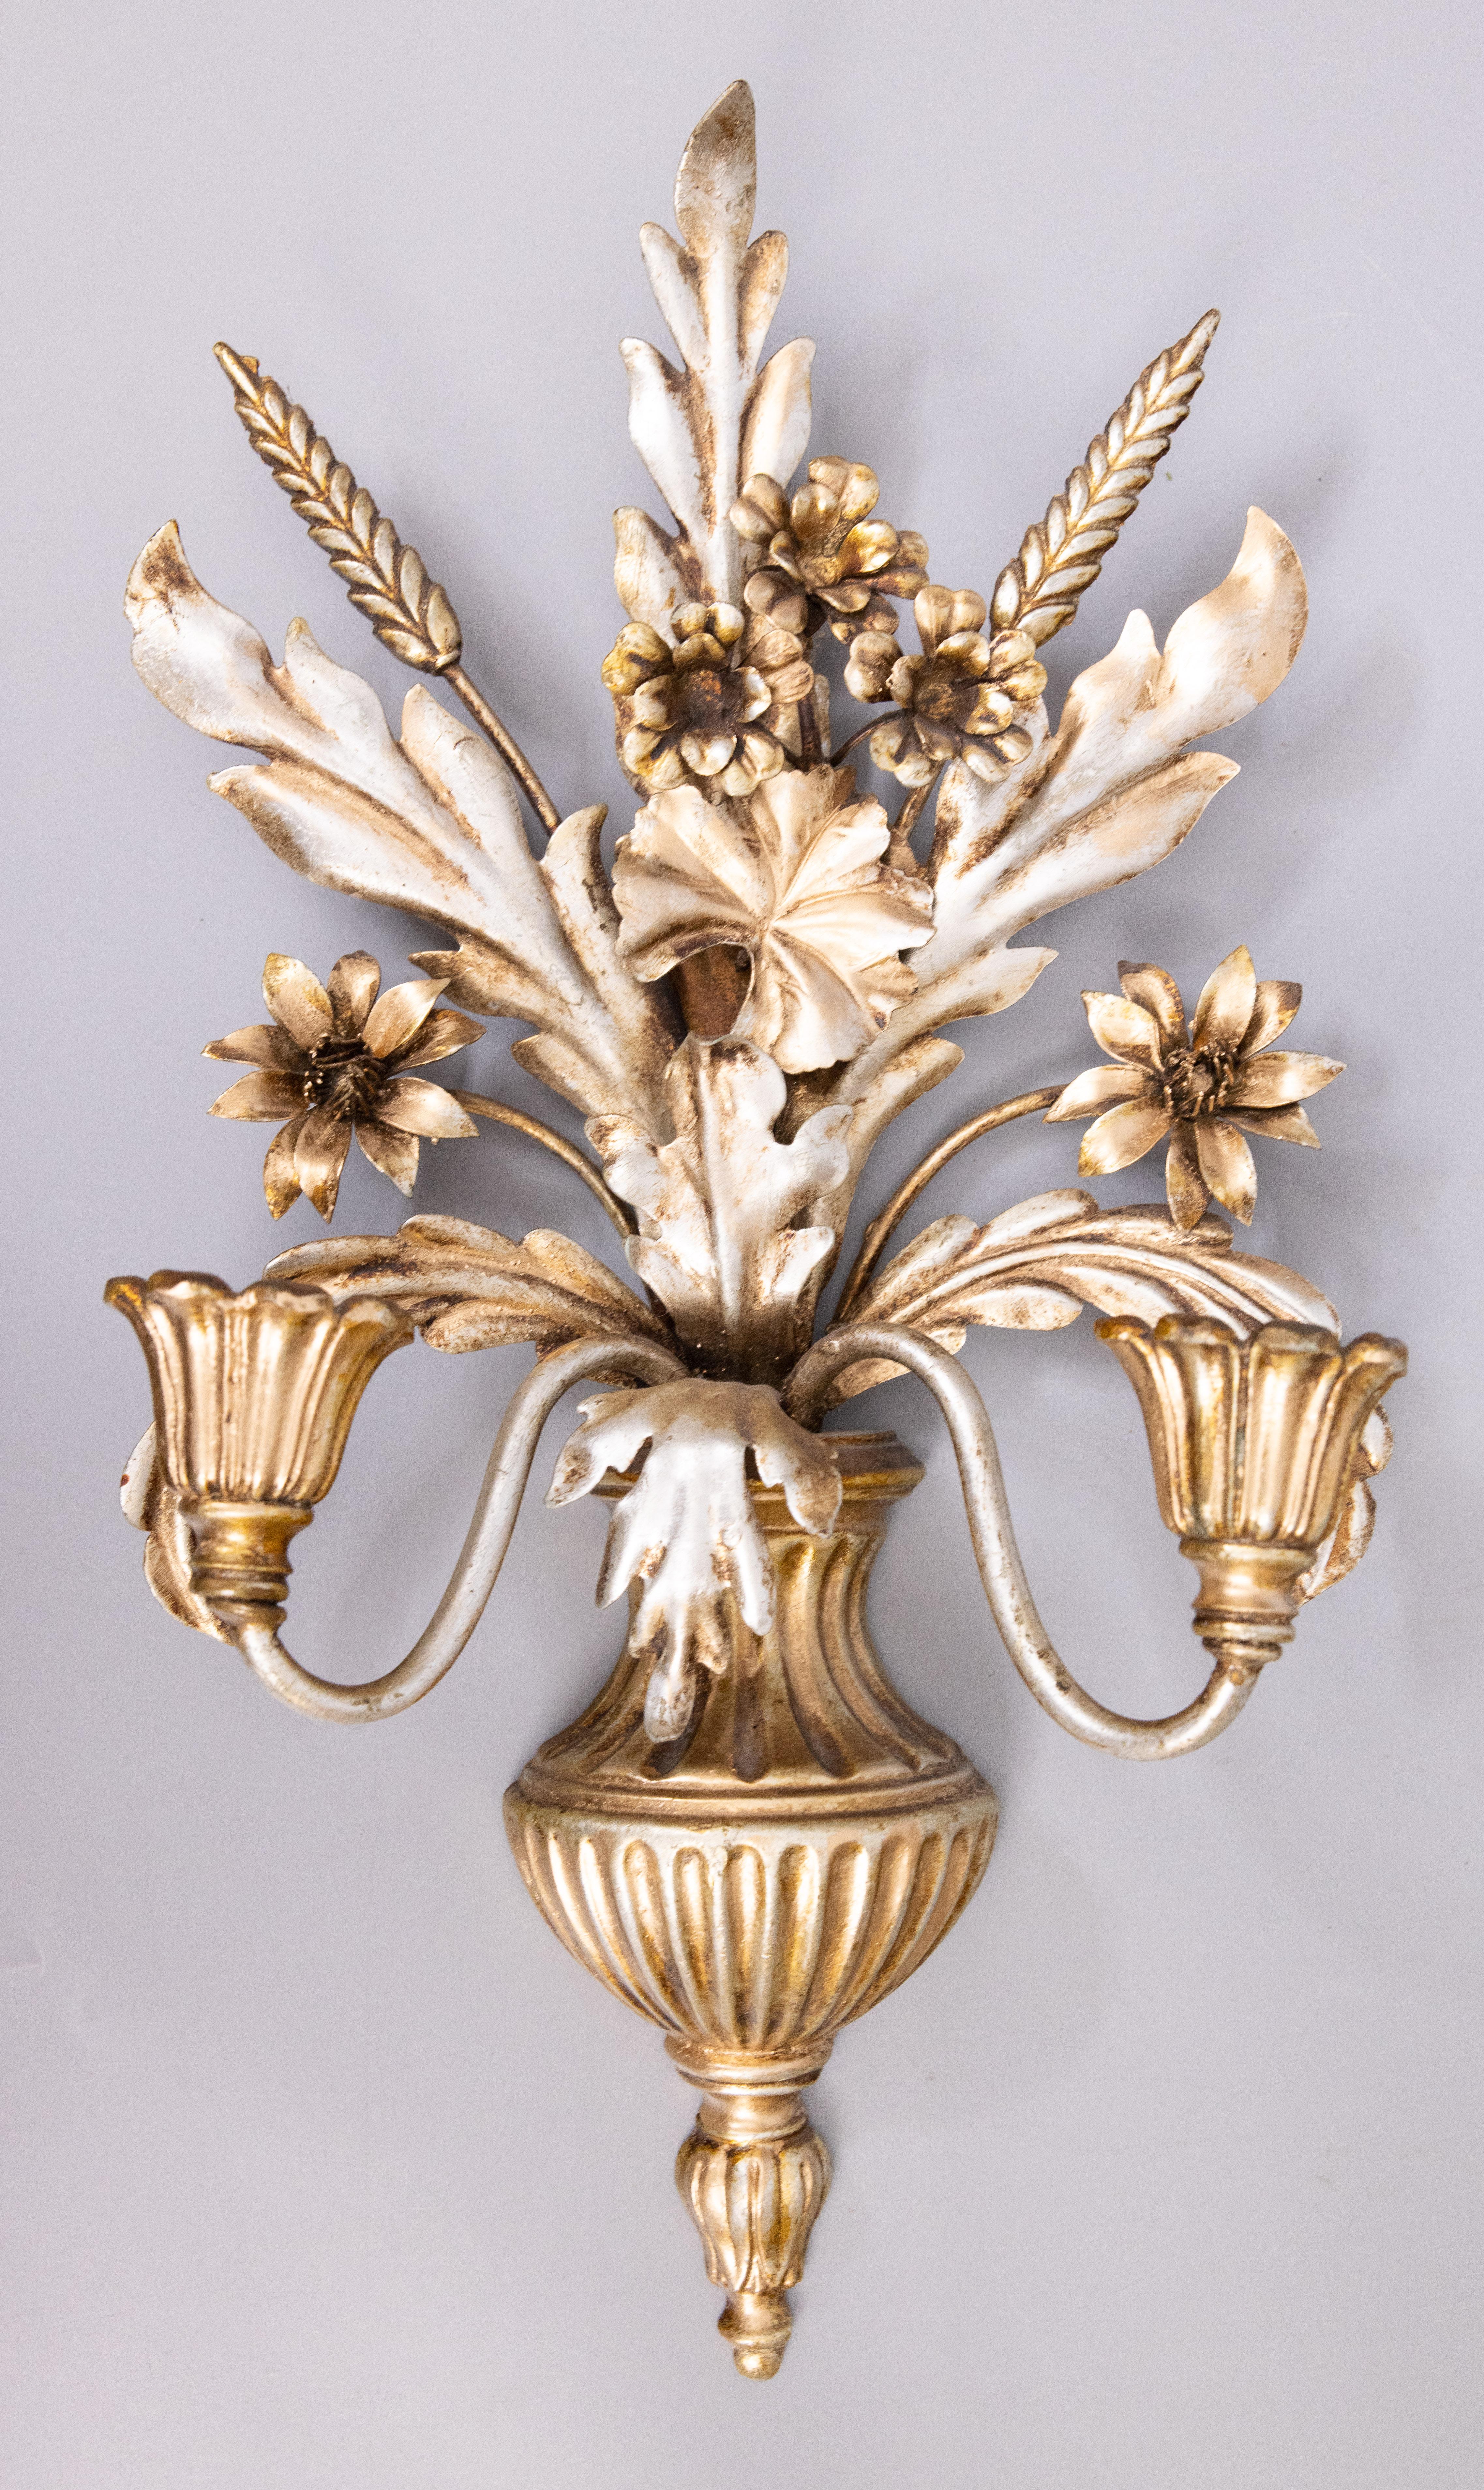 A stunning pair of Mid-Century Italian silver and gold gilt tole two arm candle wall sconces. These gorgeous sconces are decorated with flowers, leaves, and wheat in a lovely silvered gilt patina. They would make a fabulous addition to any